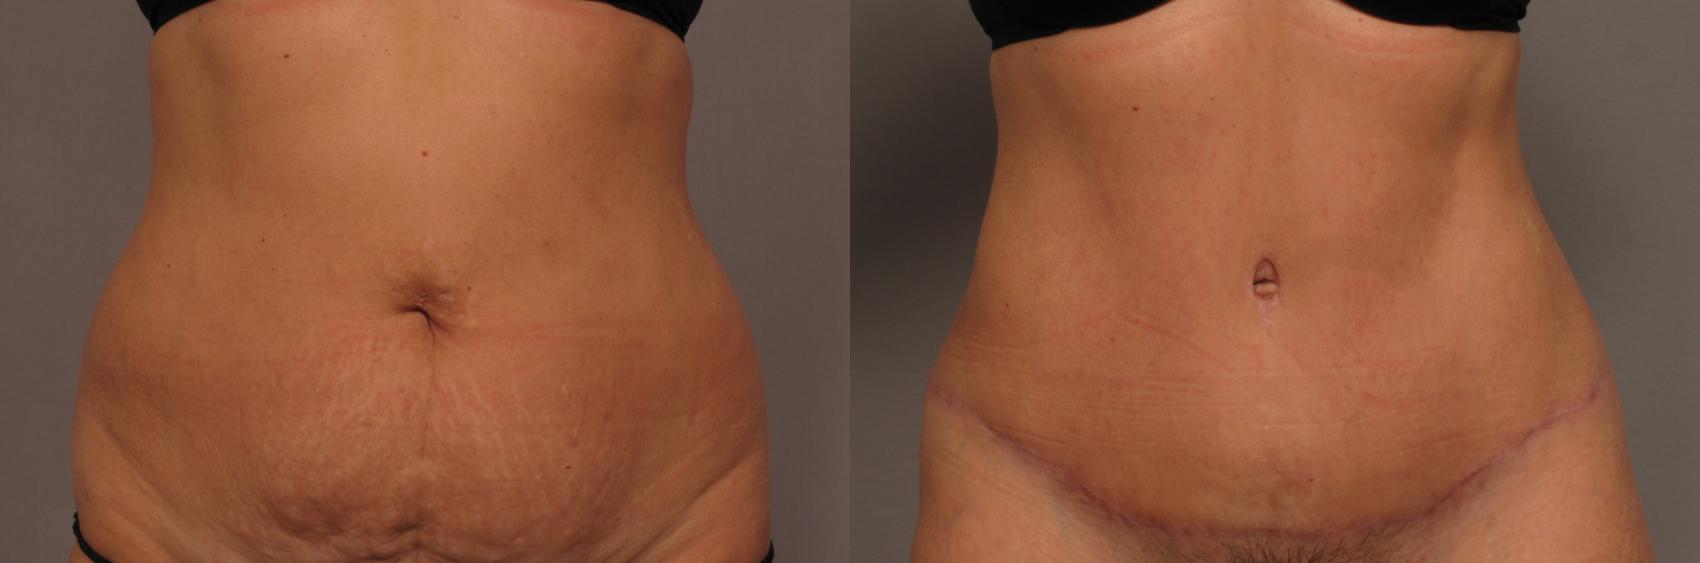 Tummy Tuck, Before and 3 Months After, Frontal View Photos by Dr. Kent V. Hasen